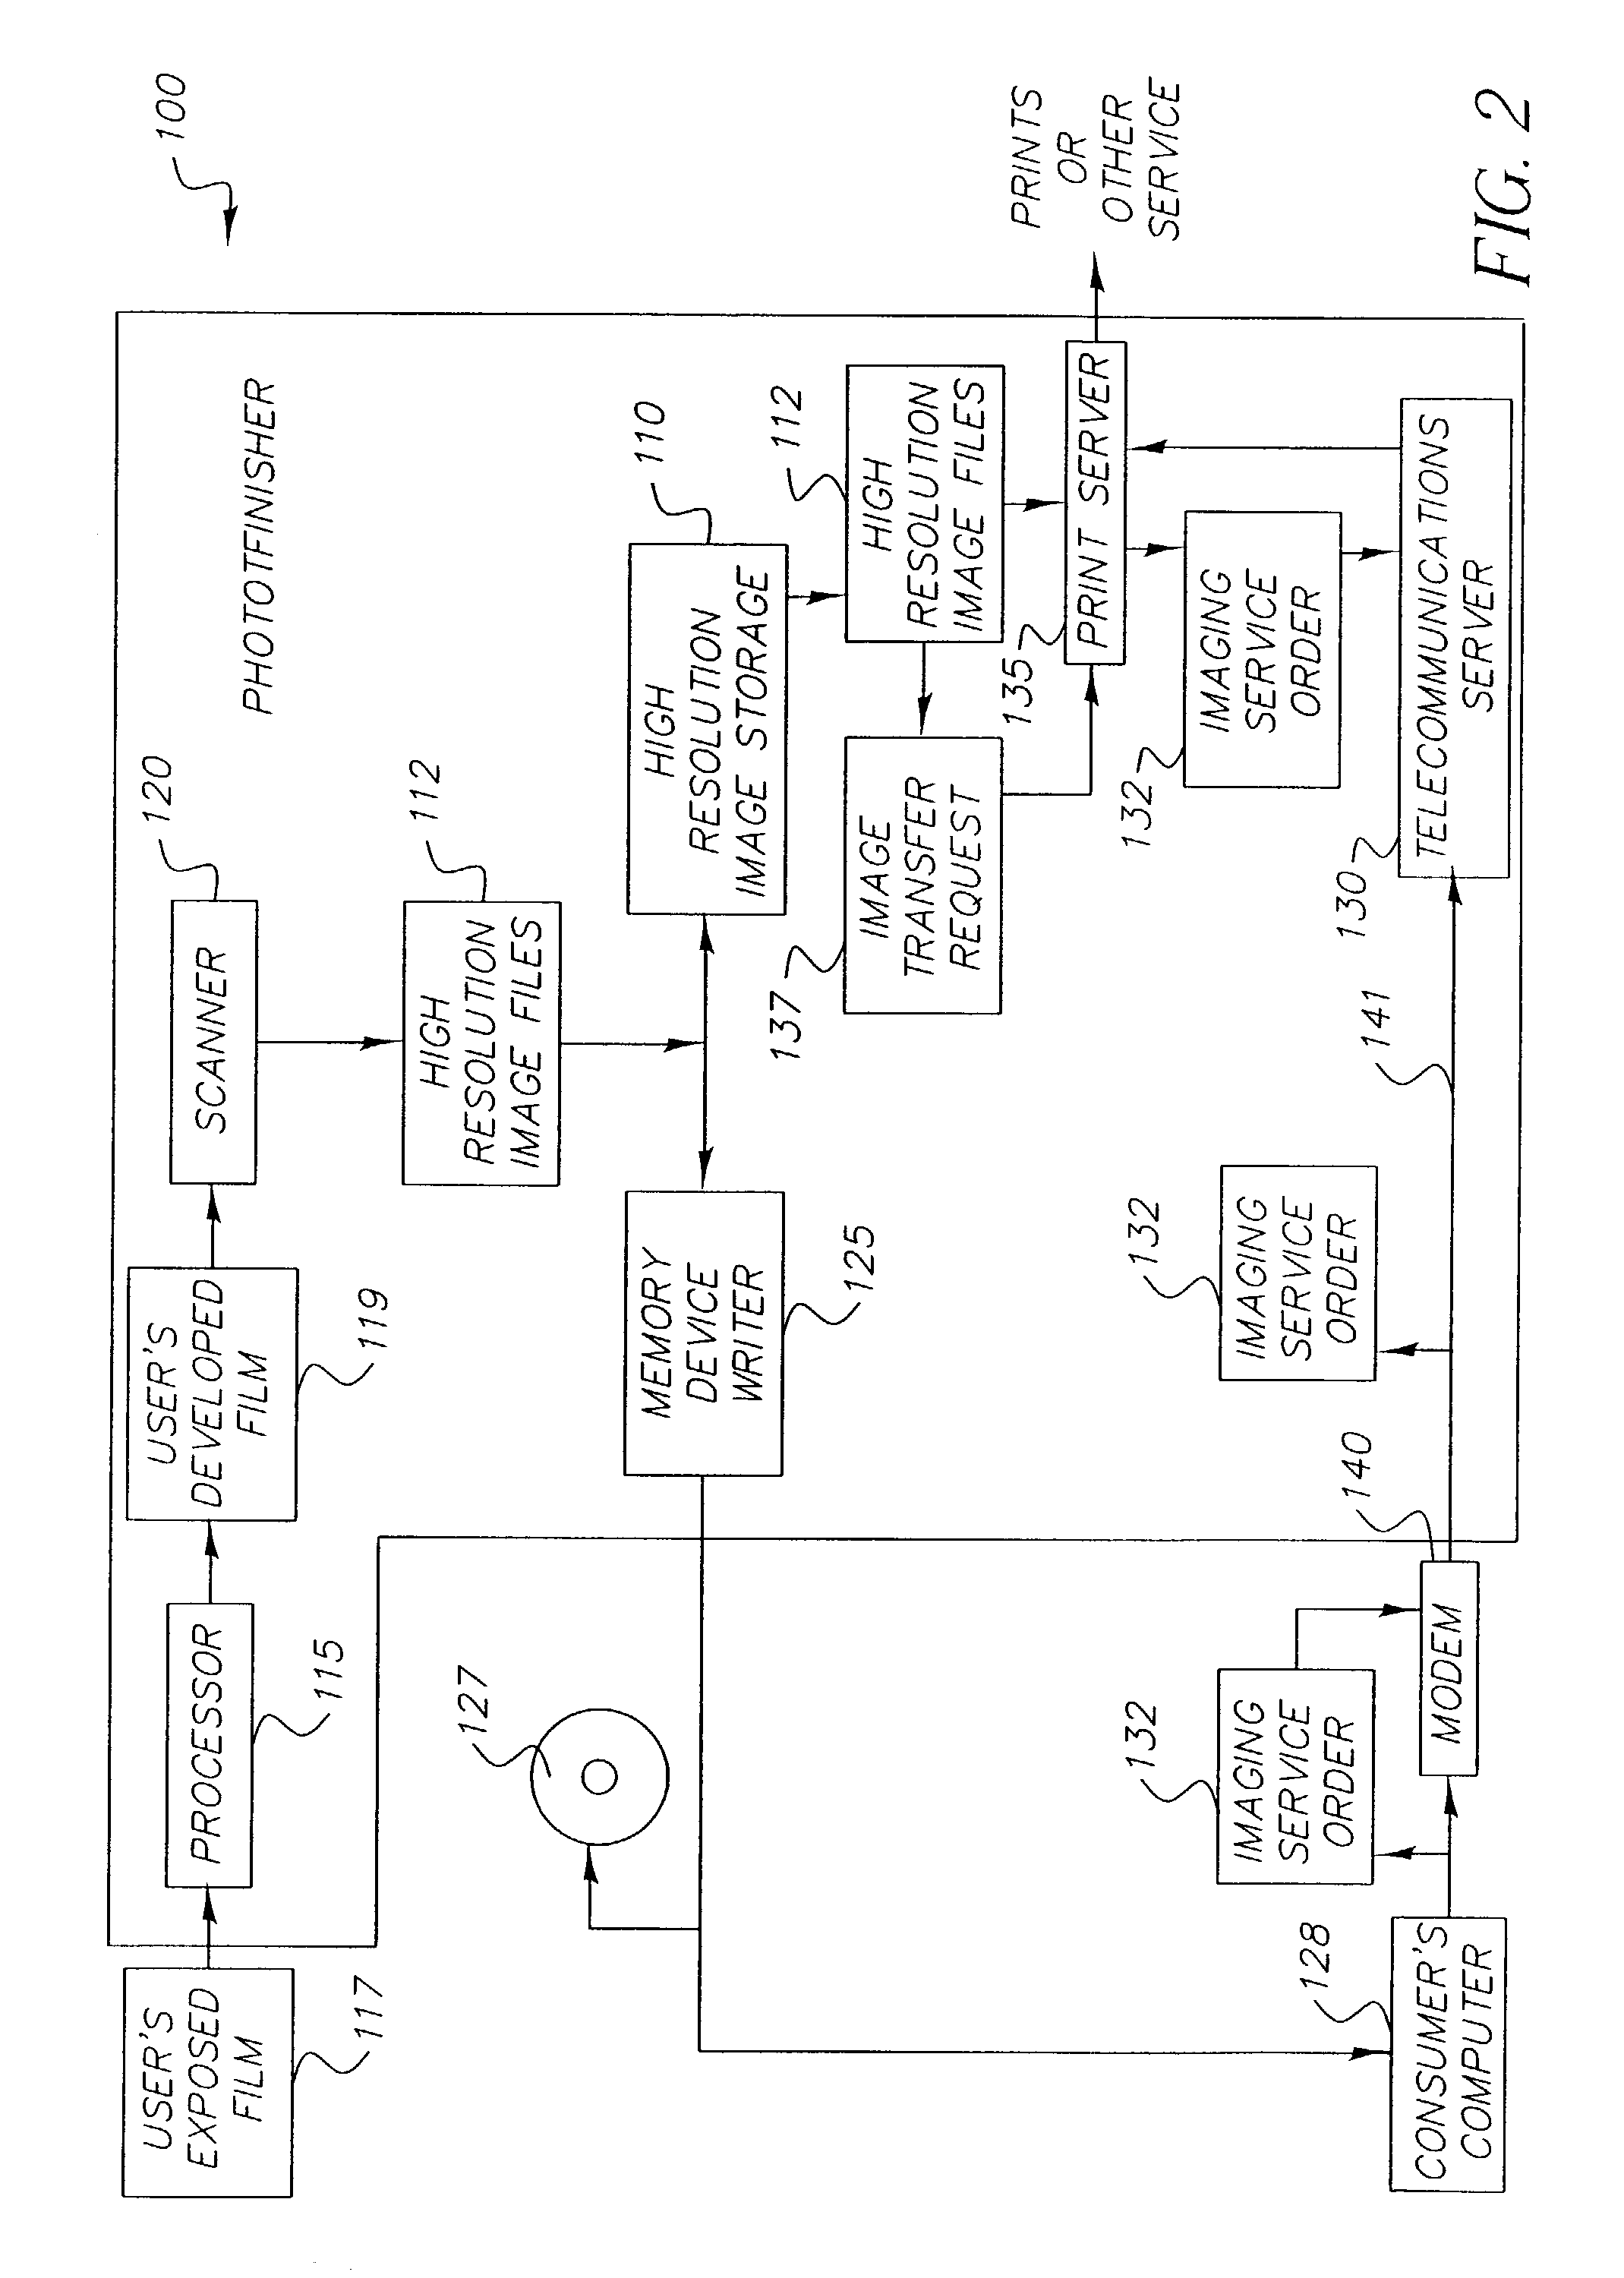 Method and system for a photo selection service